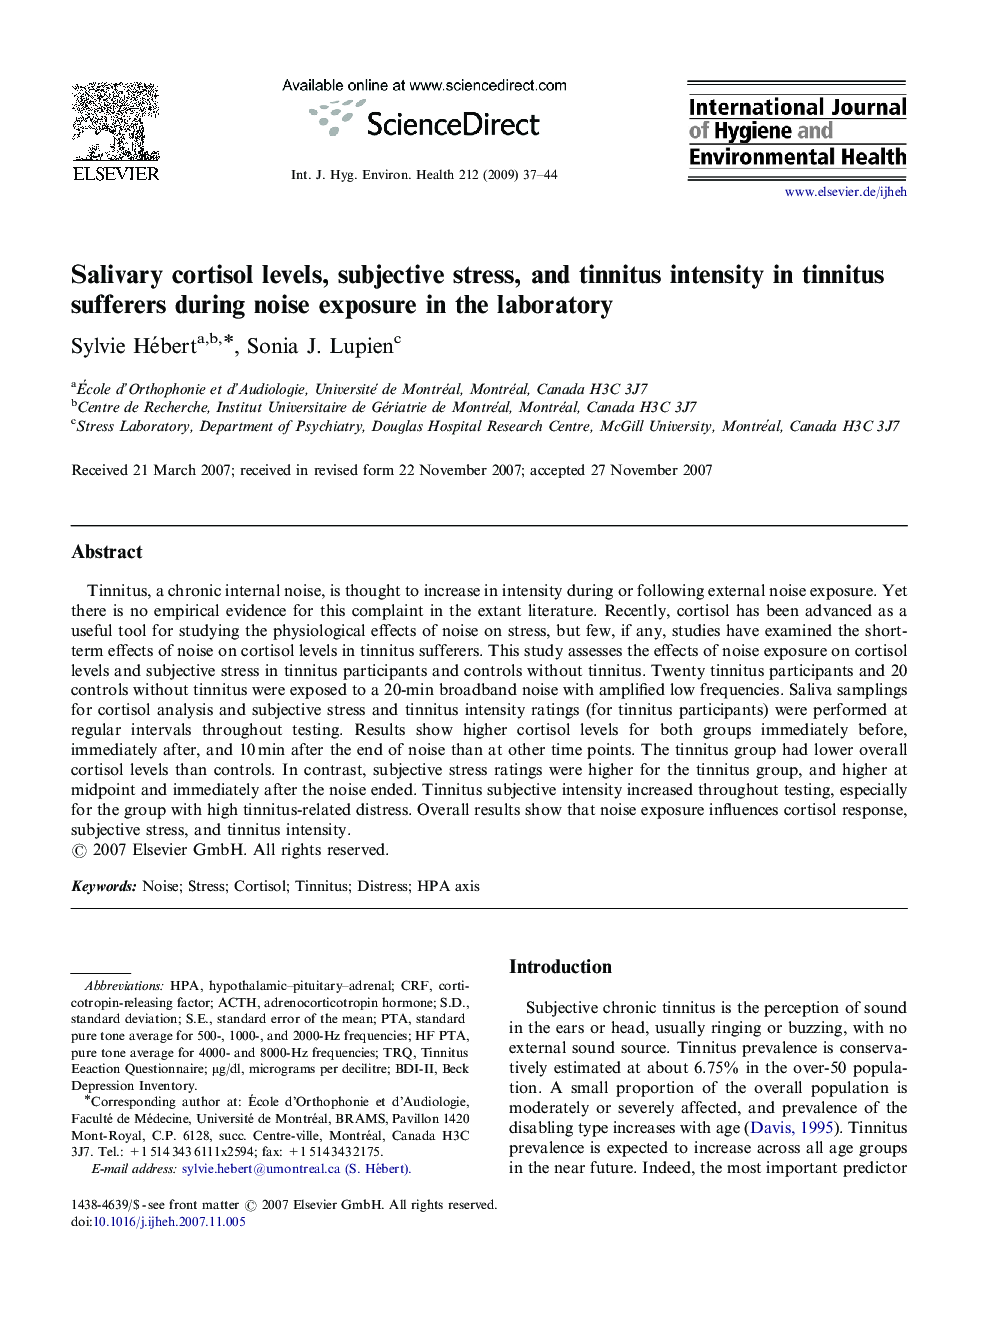 Salivary cortisol levels, subjective stress, and tinnitus intensity in tinnitus sufferers during noise exposure in the laboratory